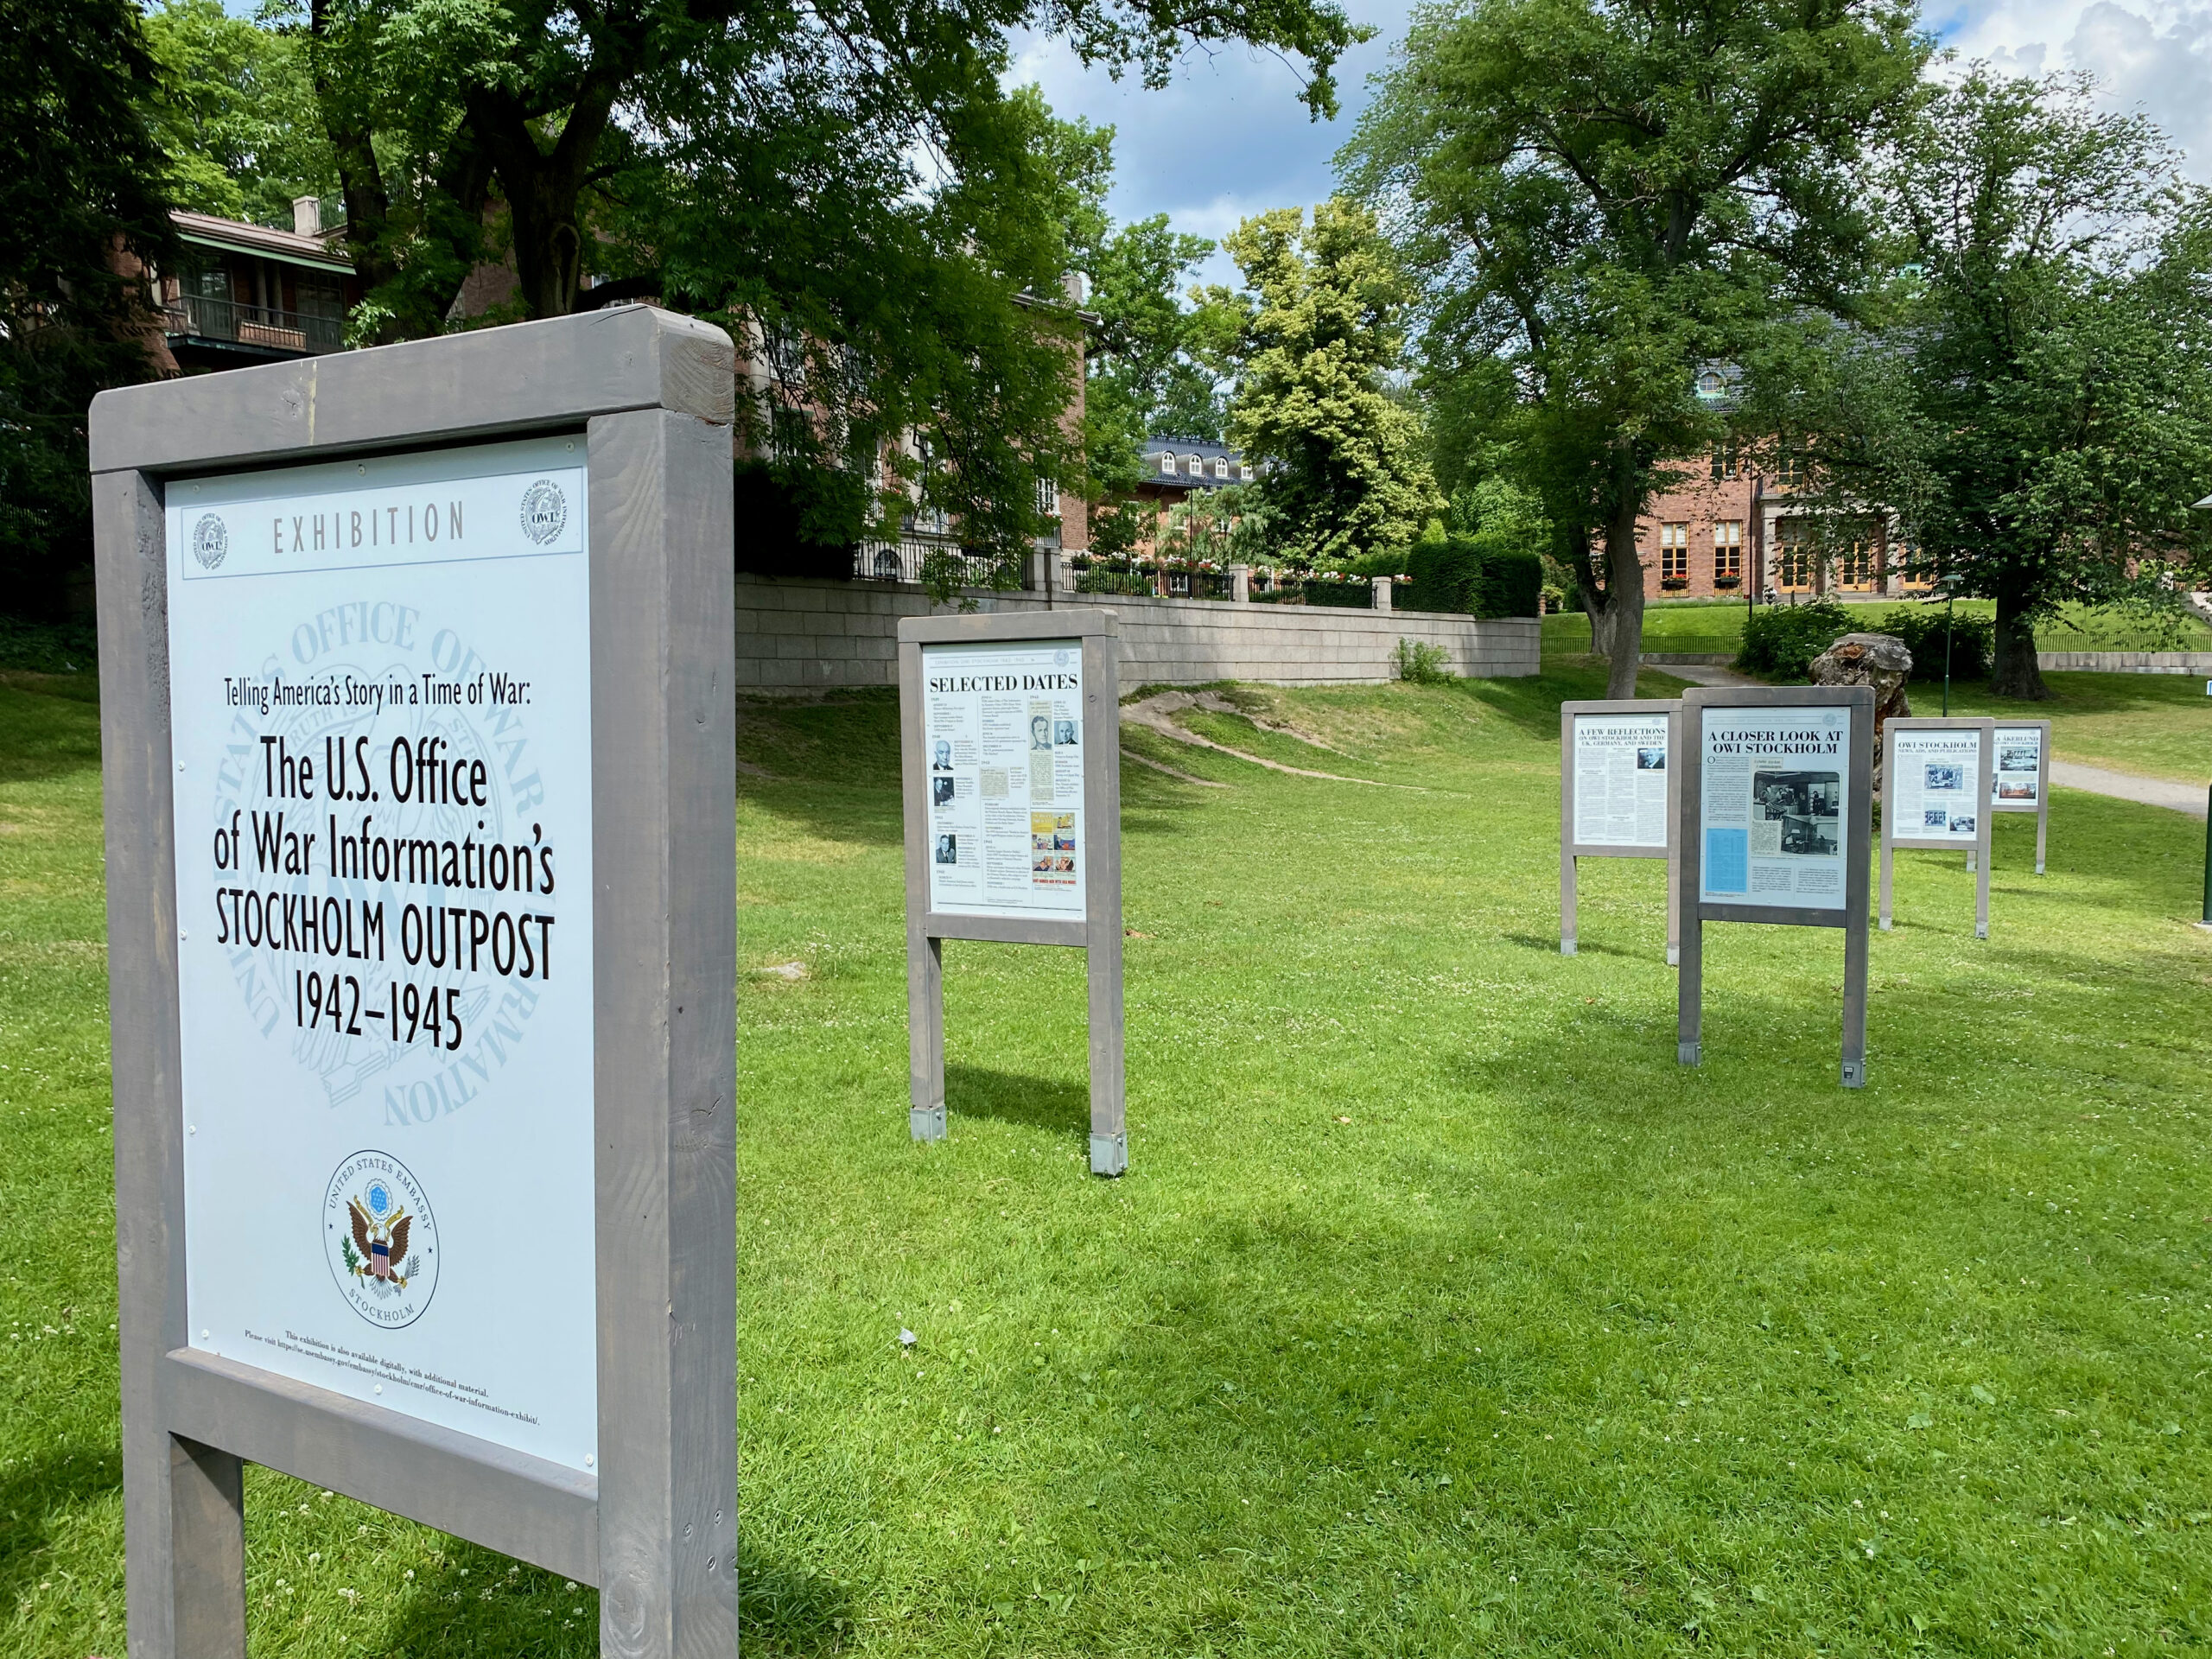 Color photograph of double-sided display panels in a park